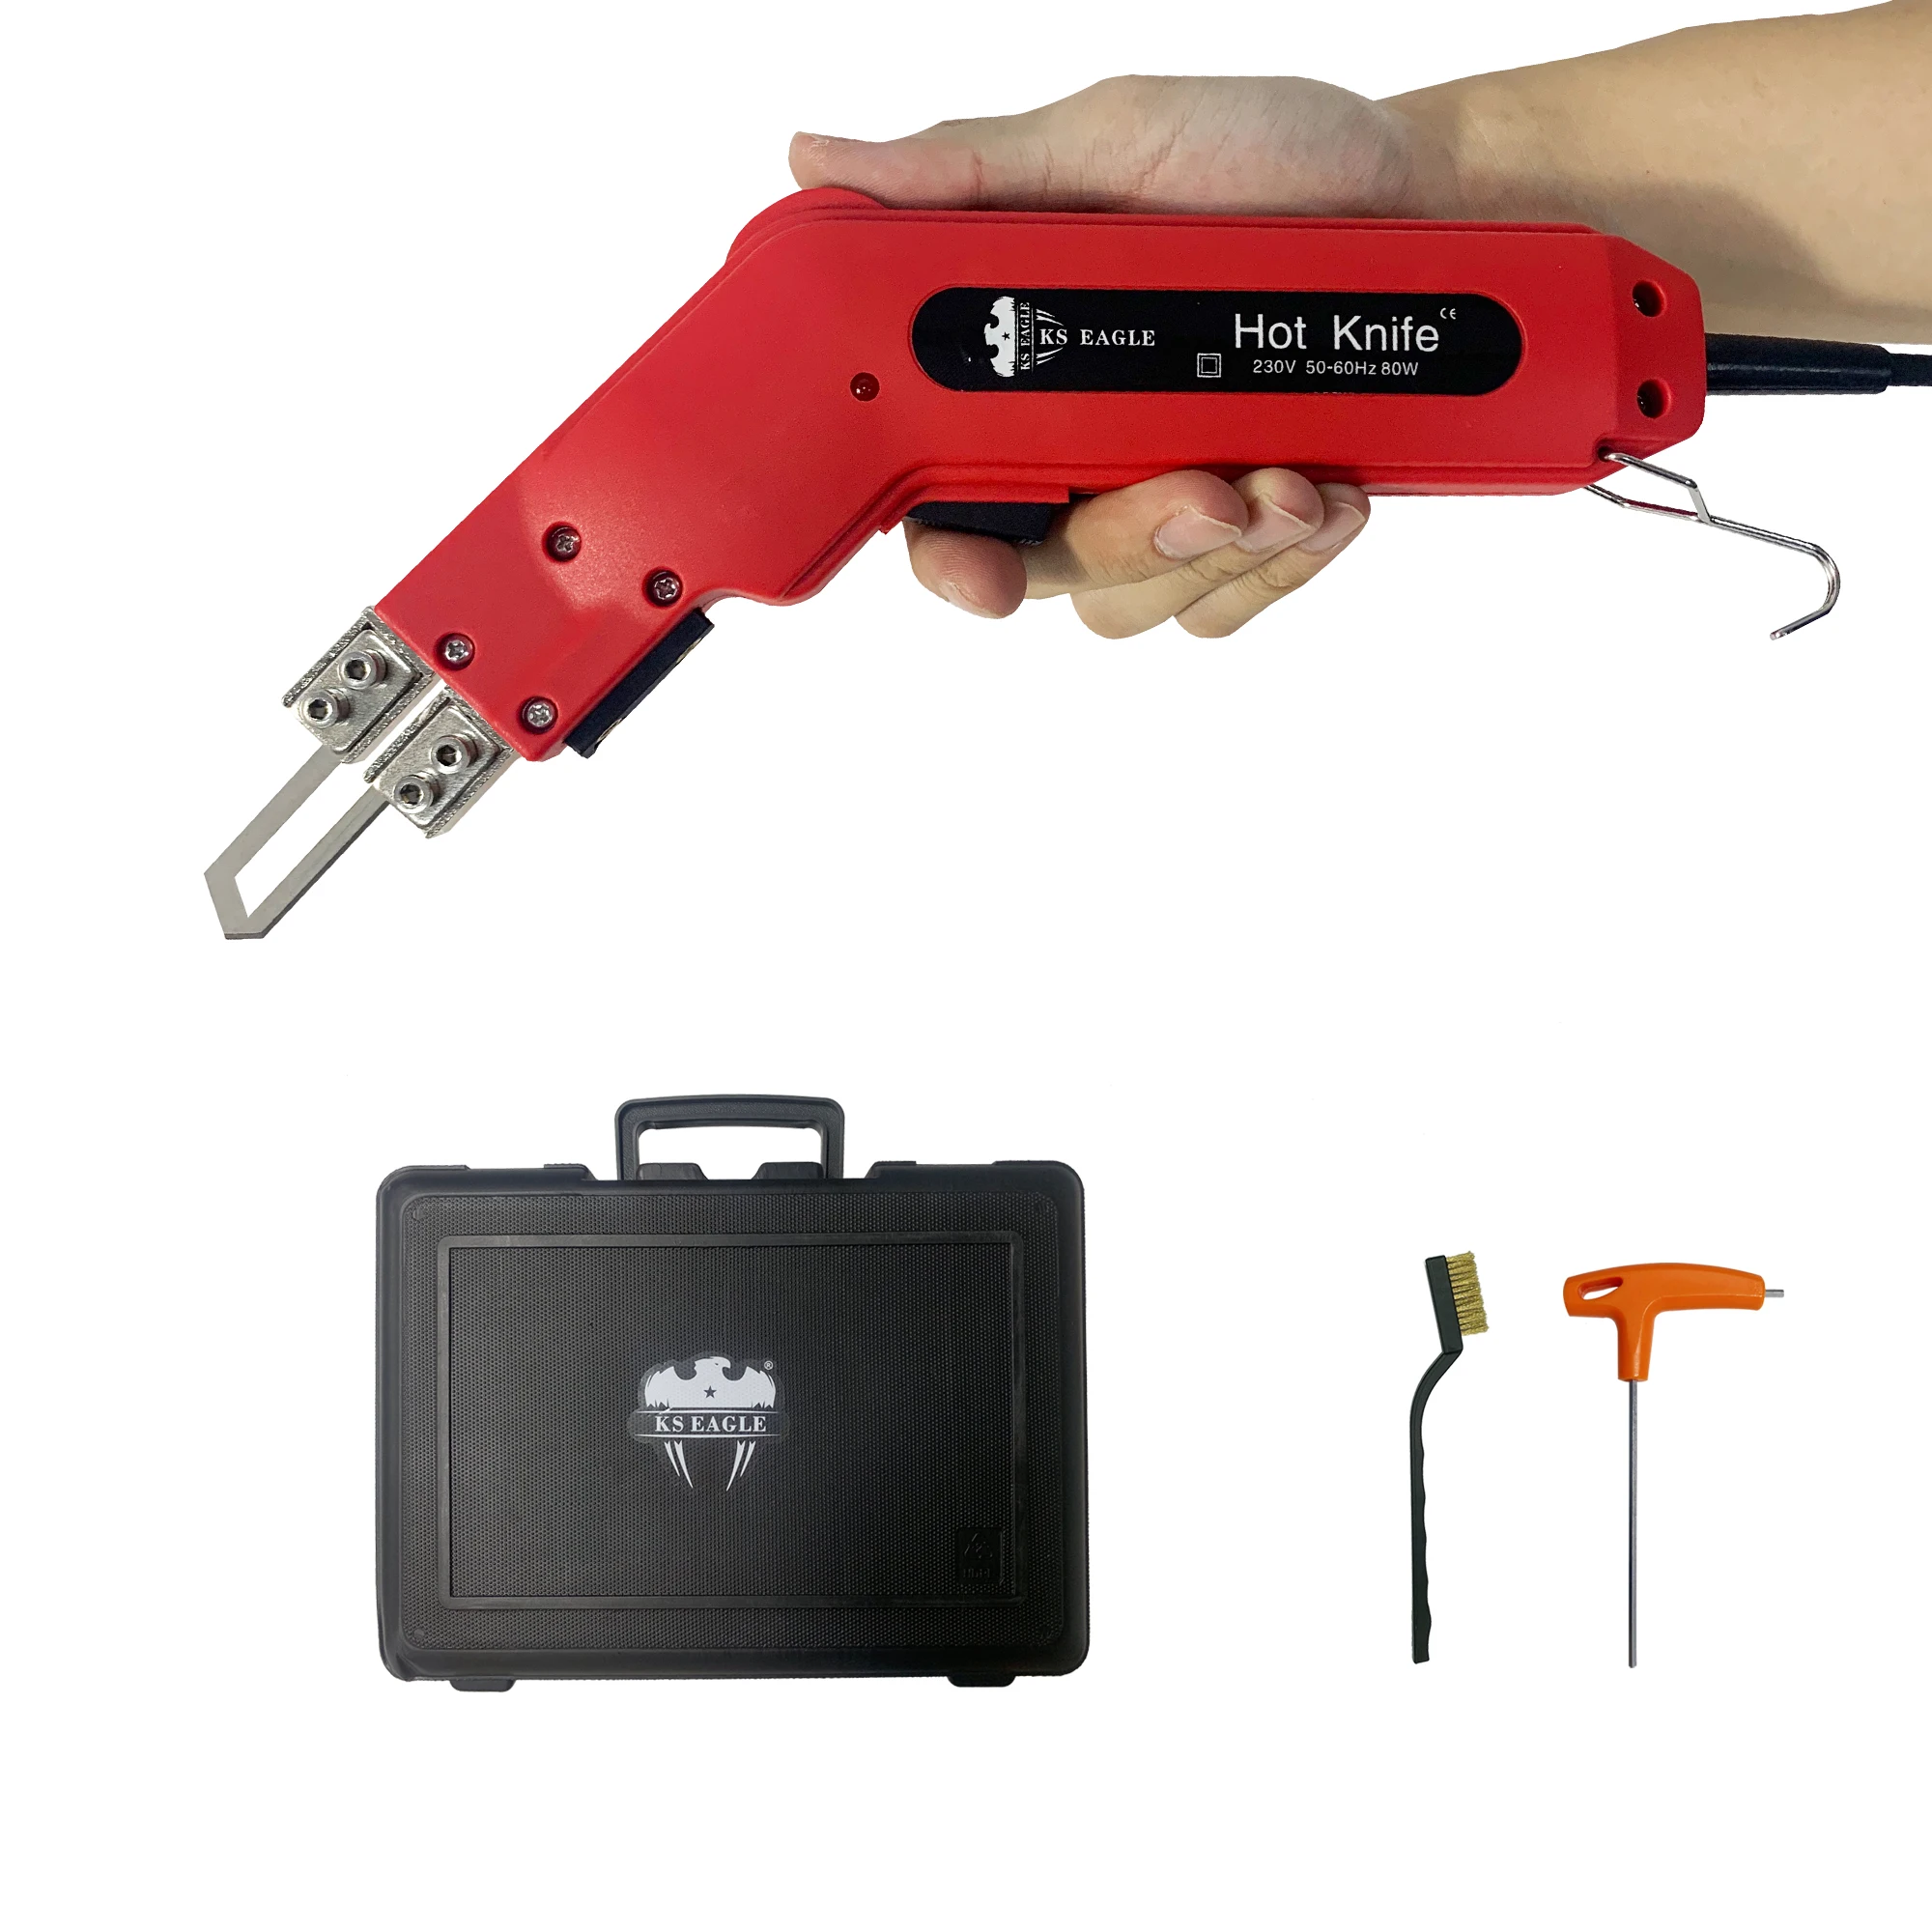 KS EAGLE Electric Hot Knife Thermal Cutter Hand Held Heat Cutter Foam Cutting Tools Non-Woven Fabric Rope Curtain Heating Knife c200 hand held infrared camera resolution 256x192 ground heating pipeline and heat loss detecti infrared thermal imager